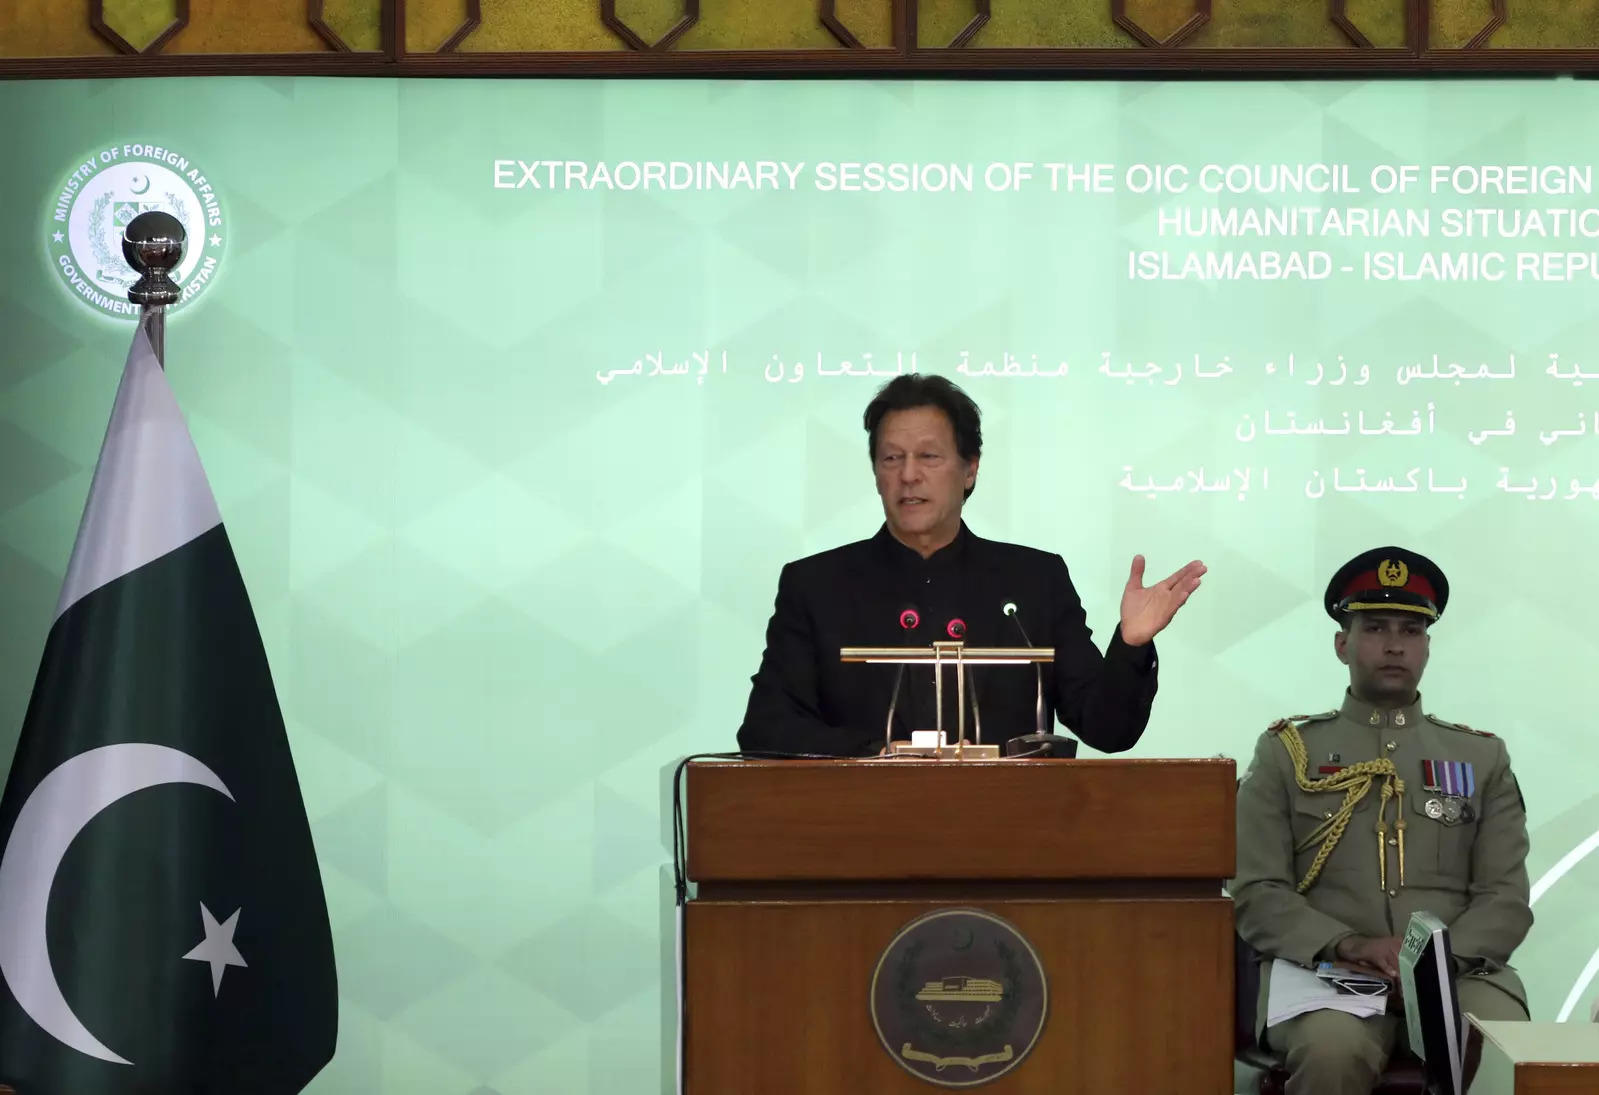 Afghanistan will become 'biggest man-made crisis' if world fails to act, Pakistan PM Imran warns at OIC Summit